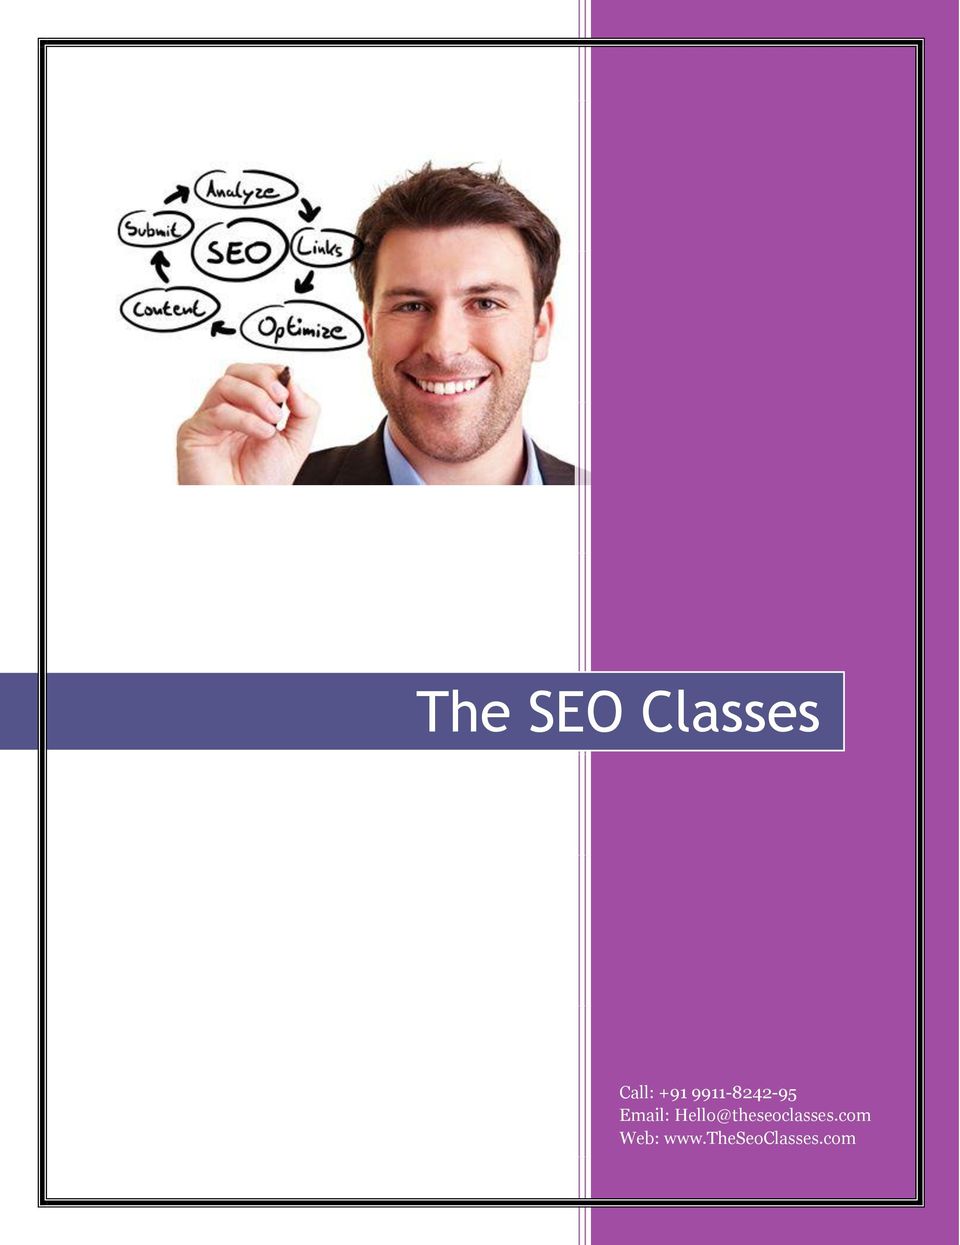 Hello@theseoclasses.